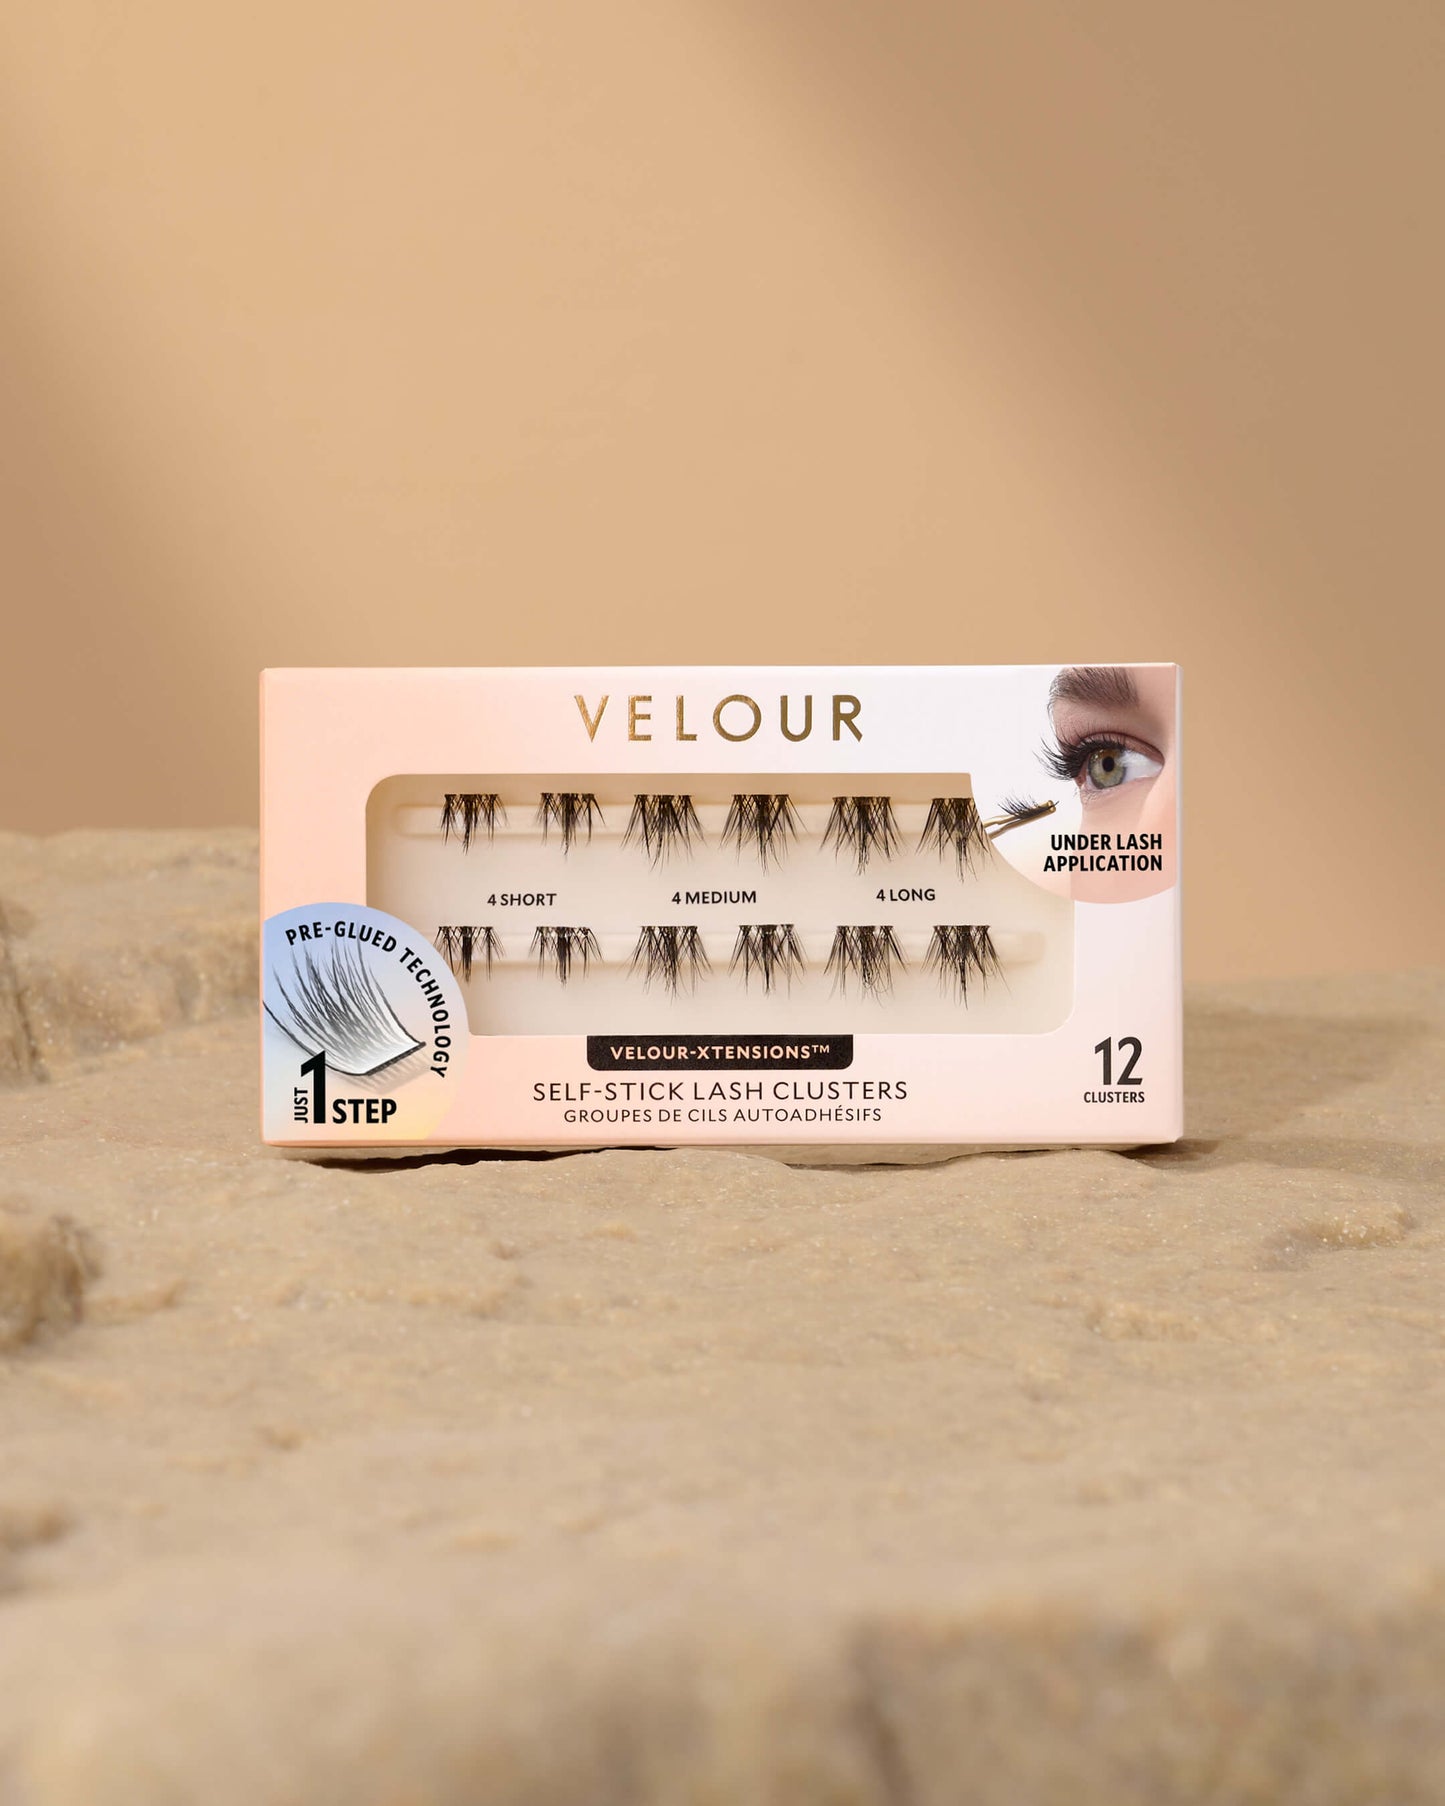 Spiky Chic Velour-Xtensions™ Self-Stick Lash Clusters